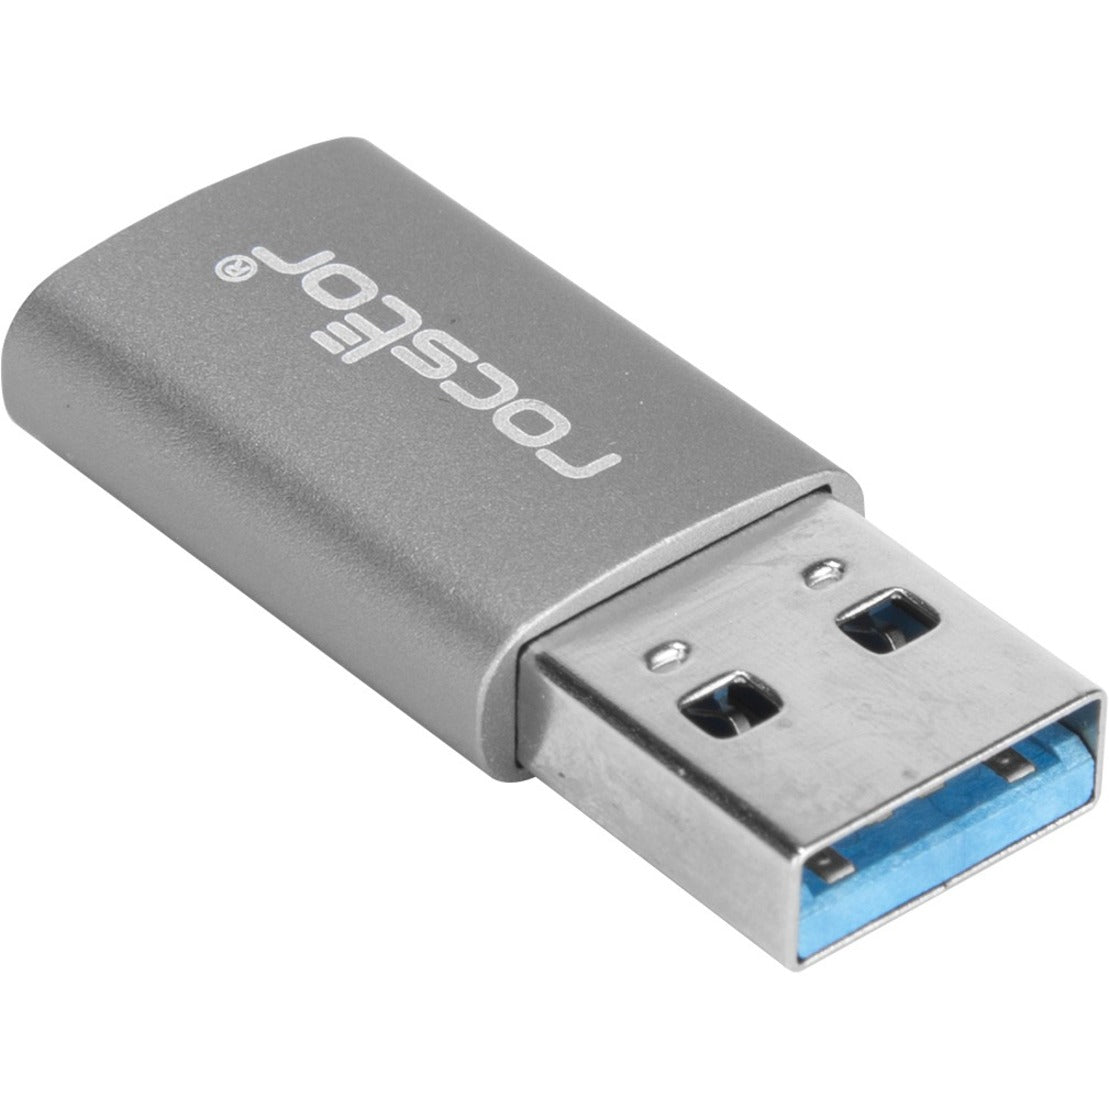 Rocstor Y10A207-G1 Premium USB 3.0 Hi-Speed Adapter USB Type A to USB-C (M/F) Reversible Charging Molded